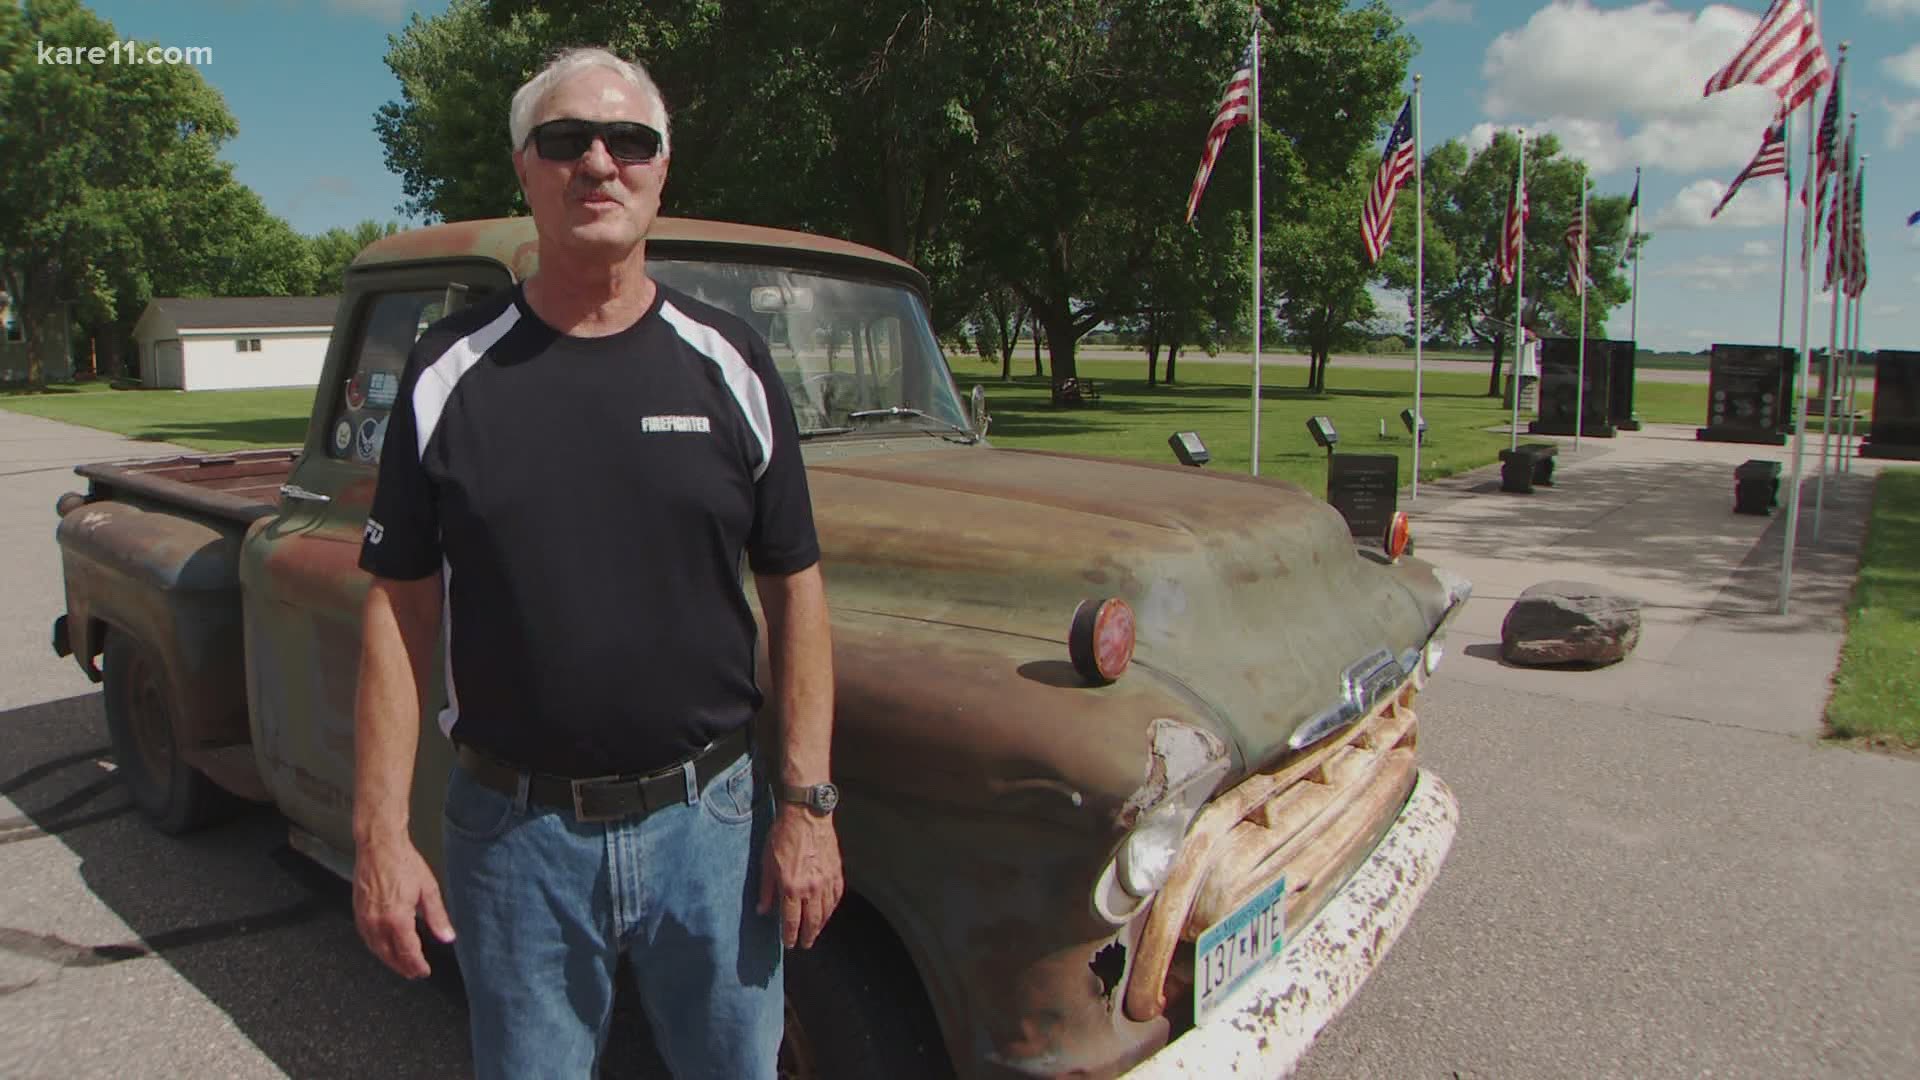 Bob Sportal bought the old truck in his 20s and drove it to work every day until he retired